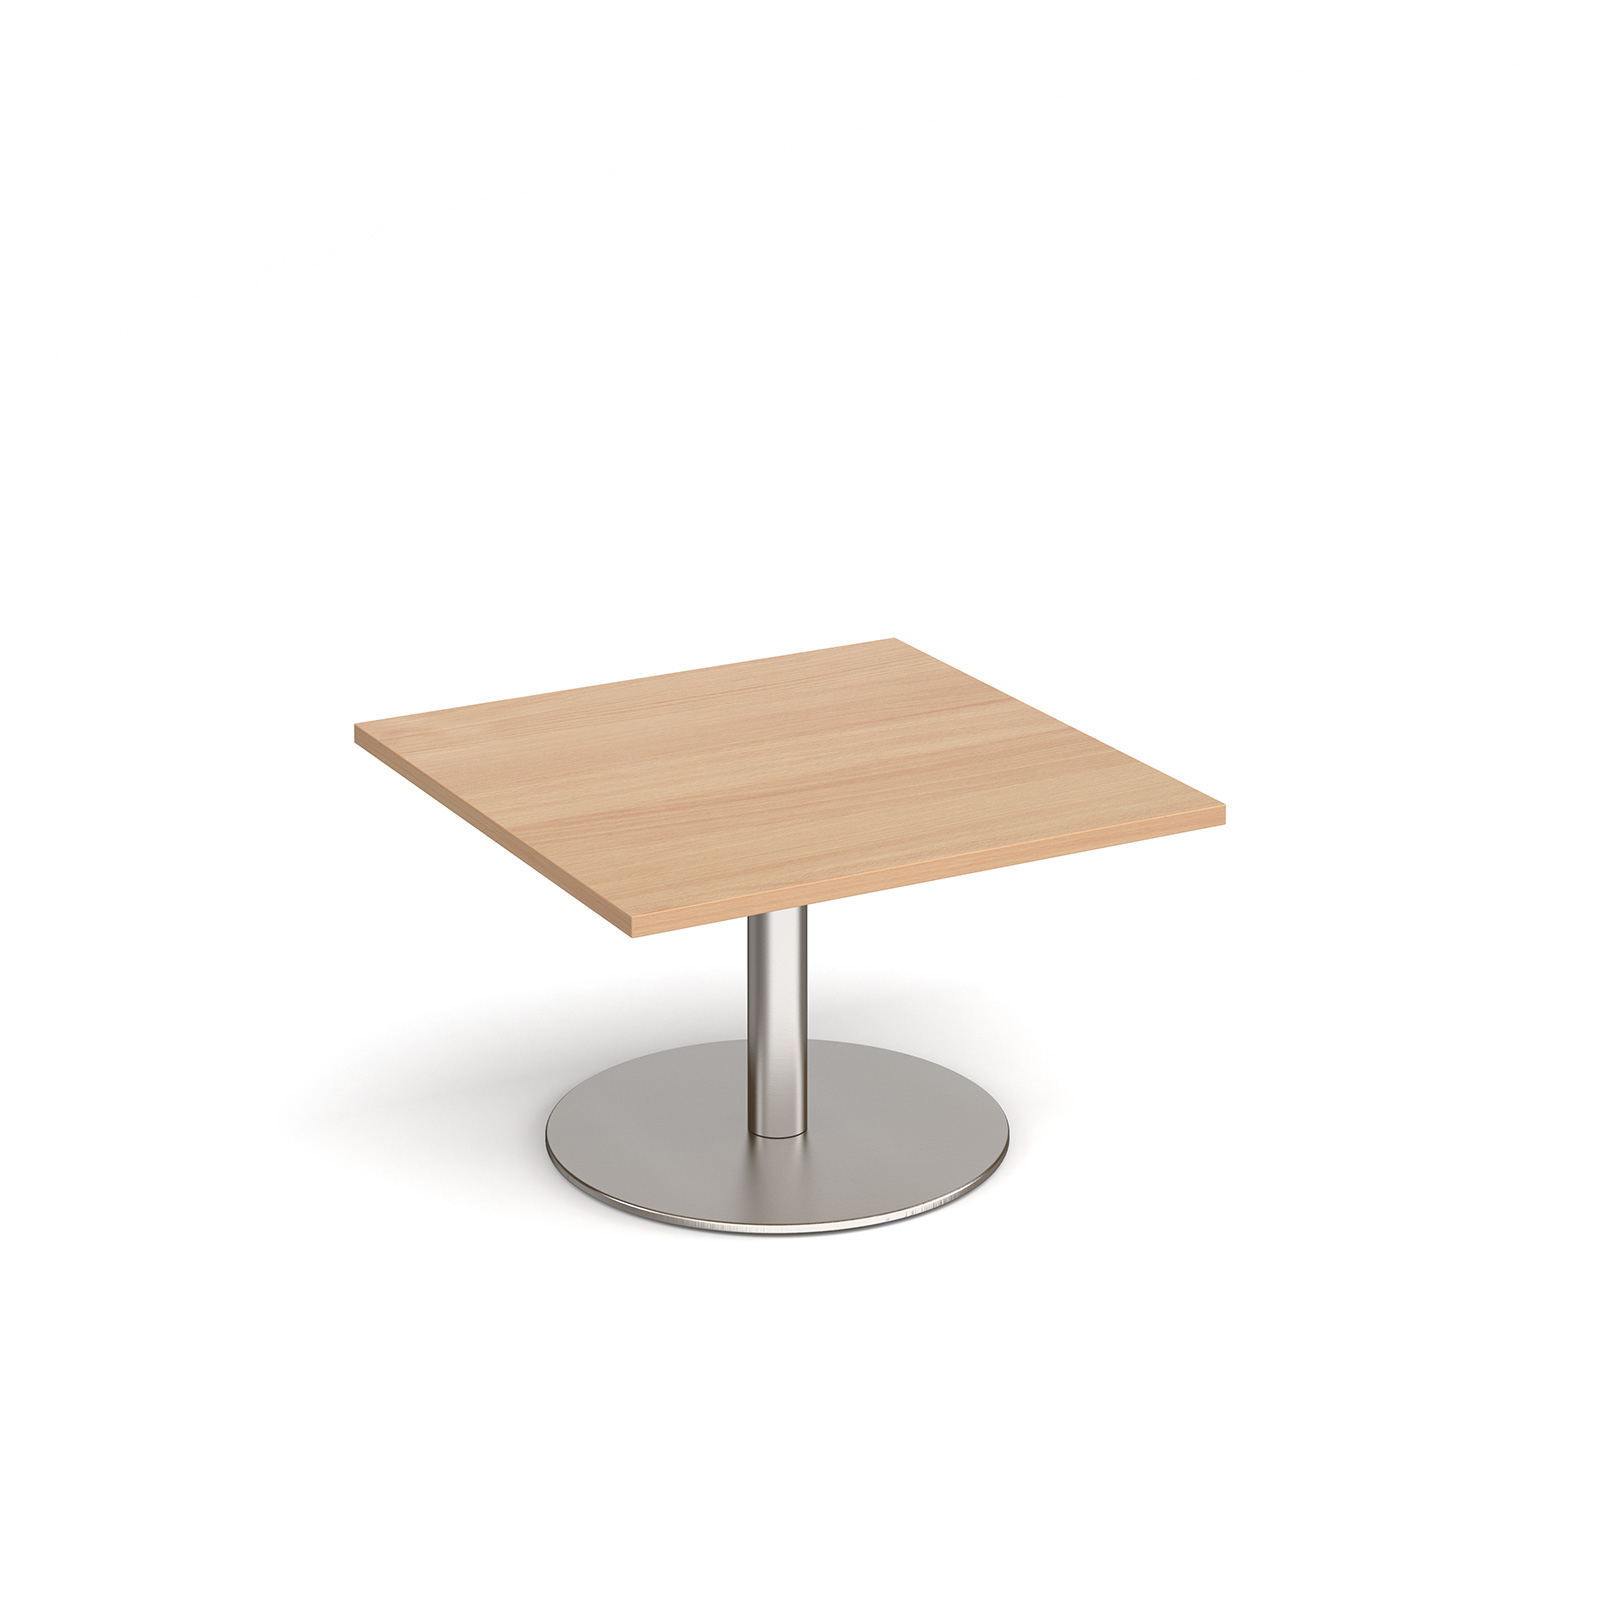 Monza Square Coffee Table with Flat Round Base